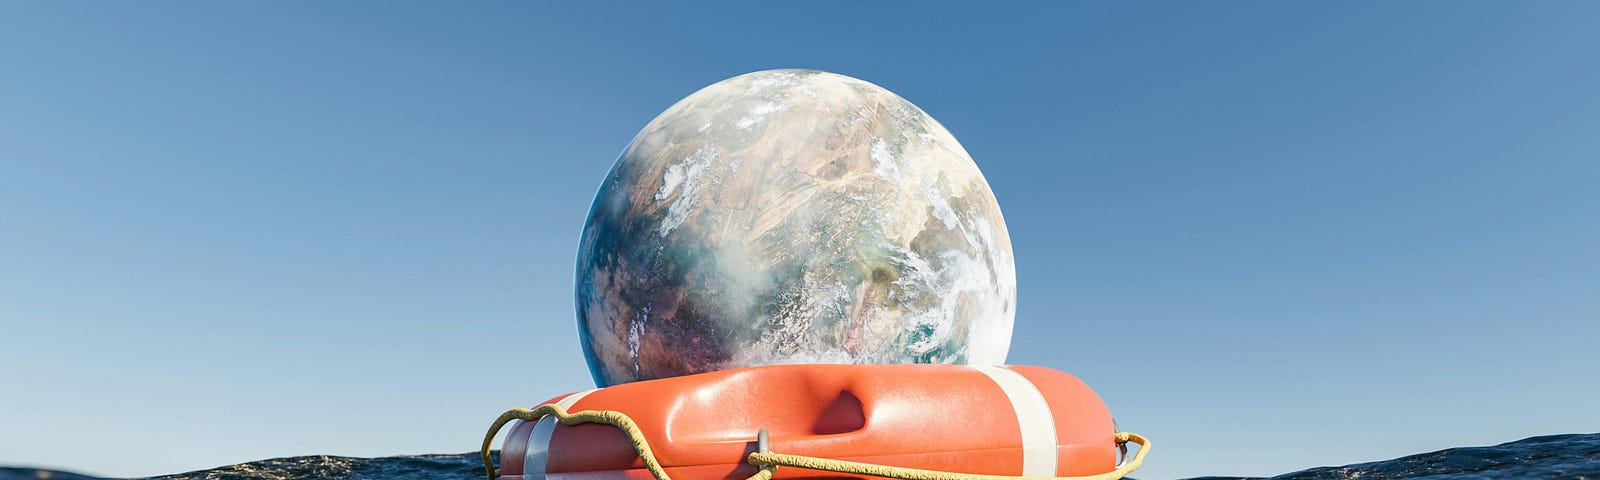 Under blue green water an orange lie preserver and the earth’s globe — Getty images Unsplash+ Licensed